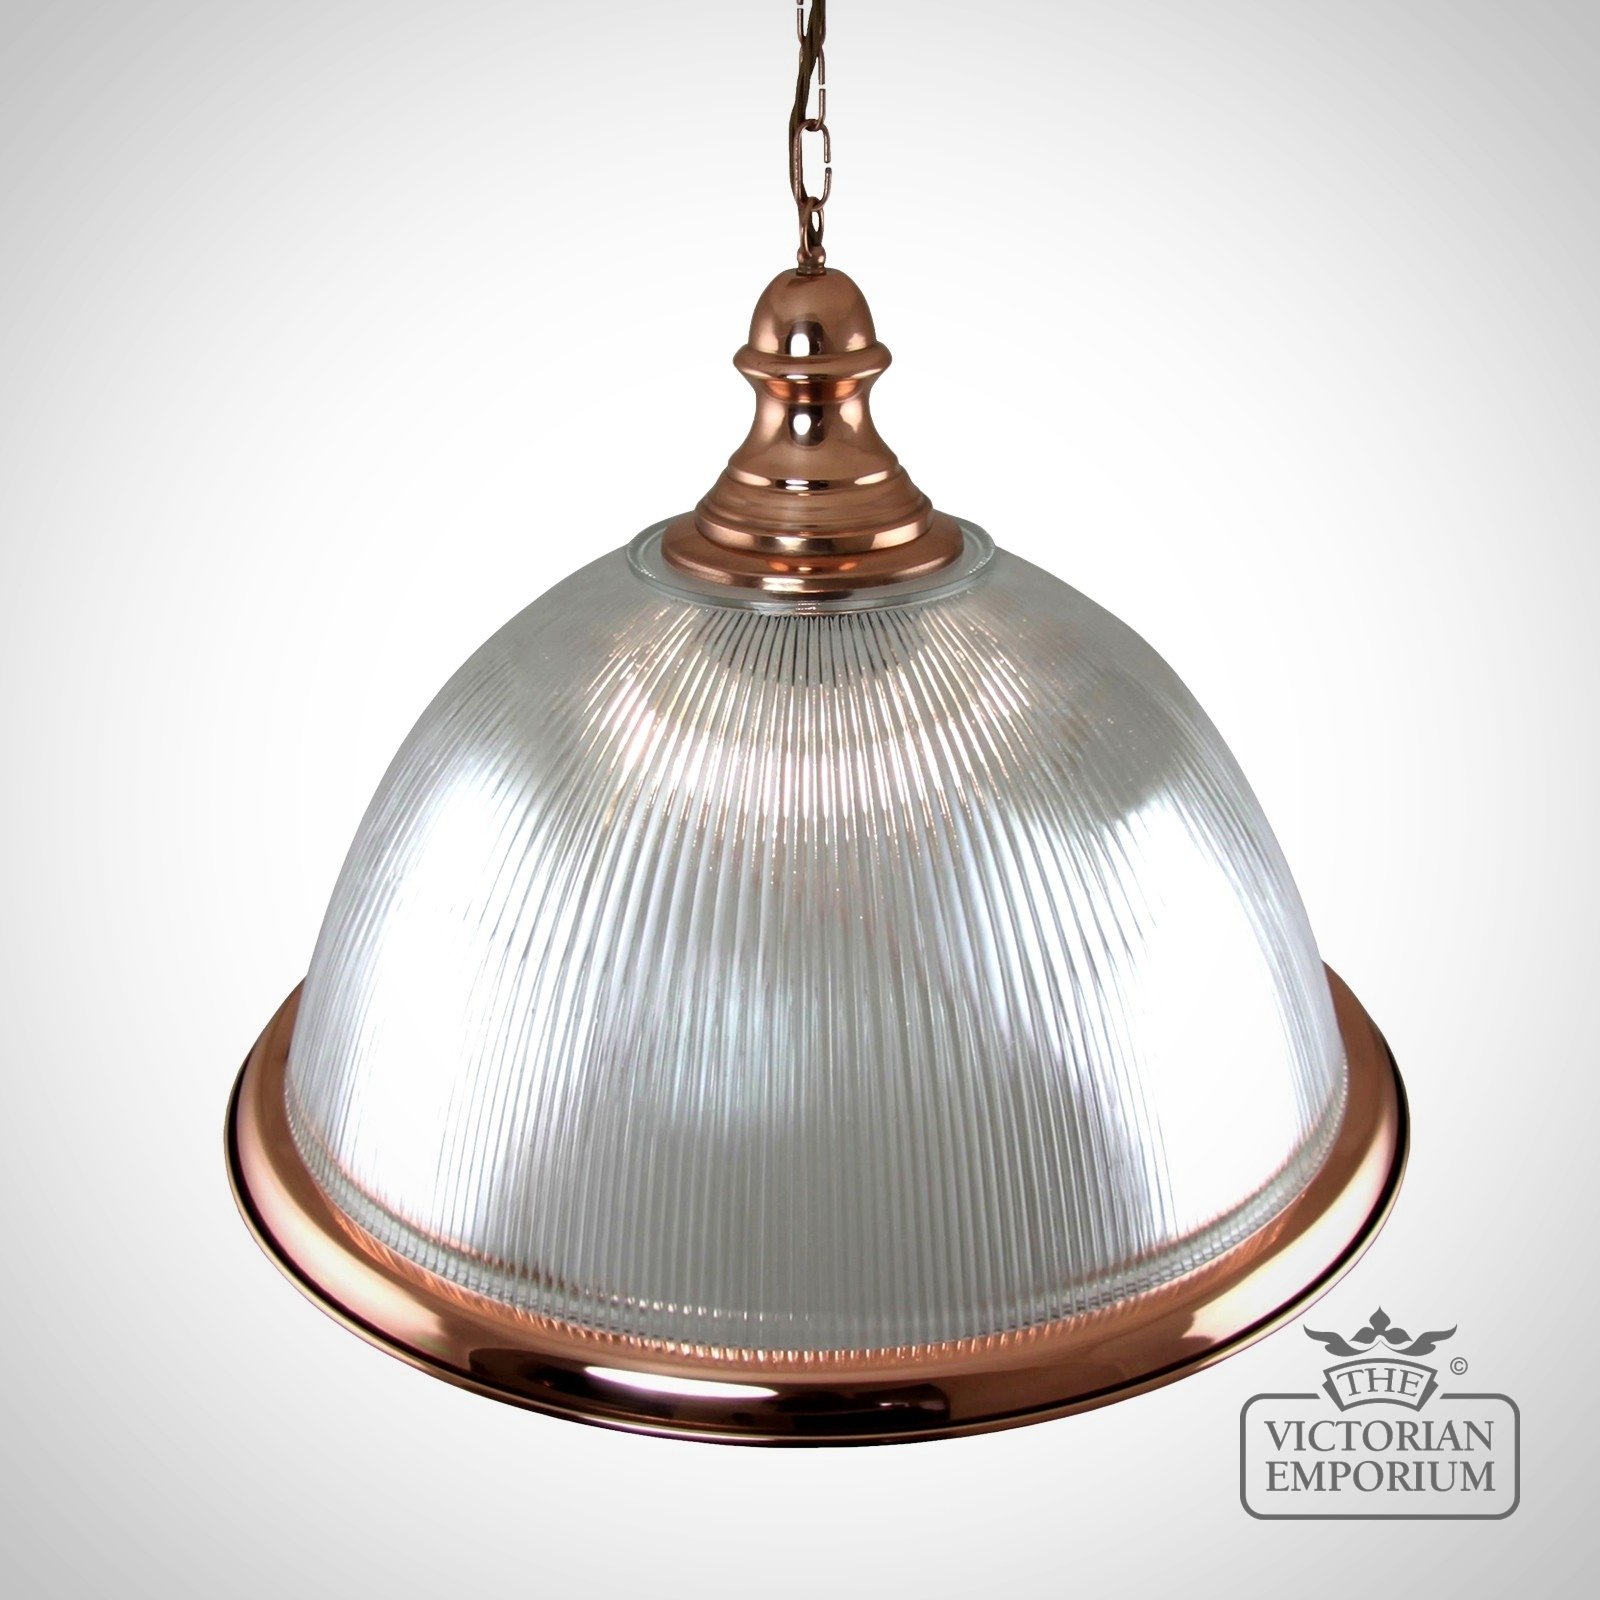 Large Dome Ceiling Light In Copper With Decorative Pendant And Copper Edging